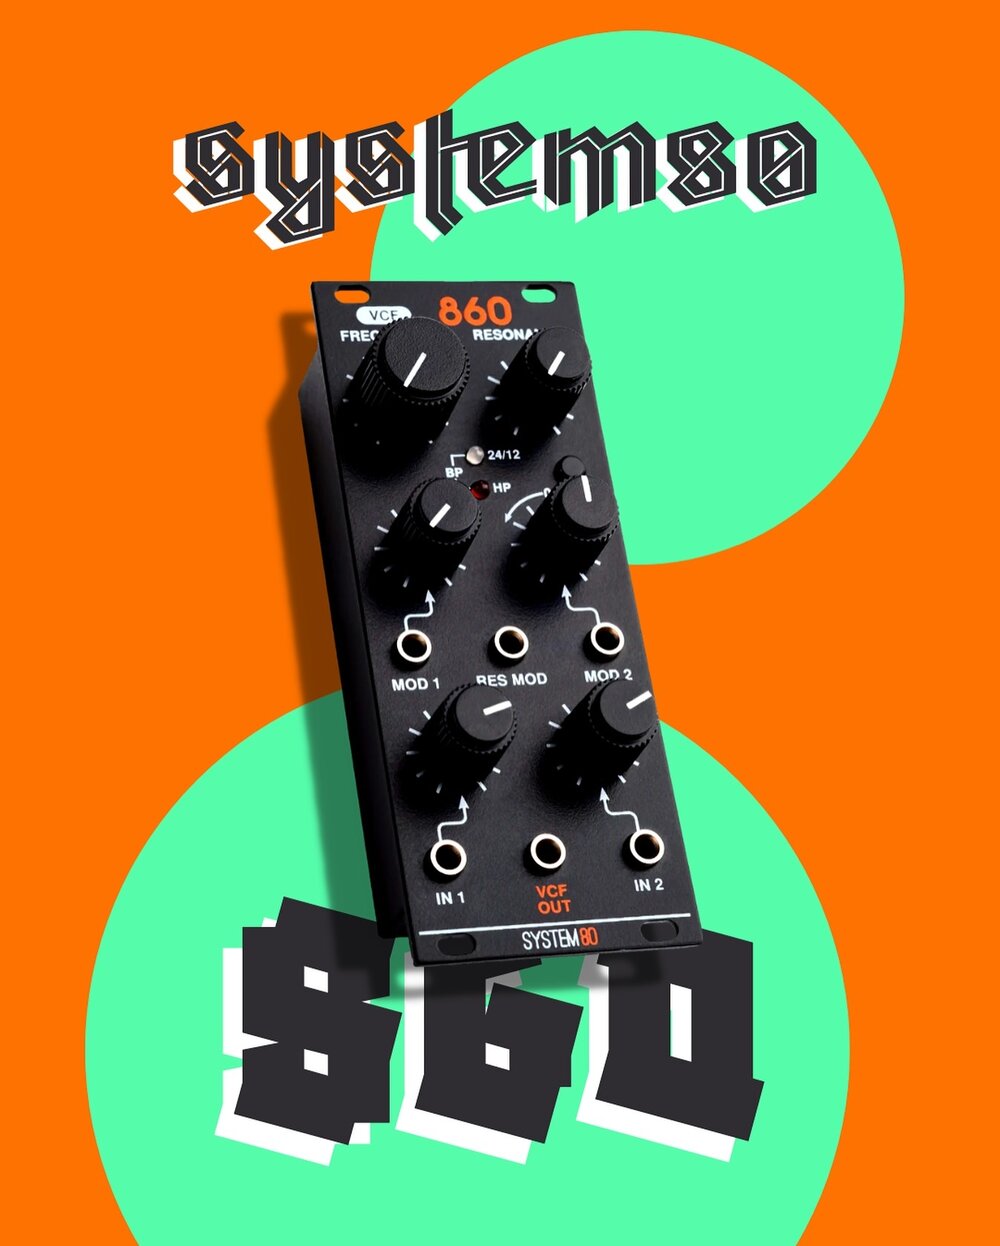 🧡 @minisystem 860 MK2 is a Eurorack Filter inspired by the filter used in the iconic Roland Jupiter-6!
📝 Check out our full hands-on review using the LINK IN BIO
&bull;
&bull;
&bull;
#system80 #jovefilter #860mk2 #eurorack #eurorackmodular #modular